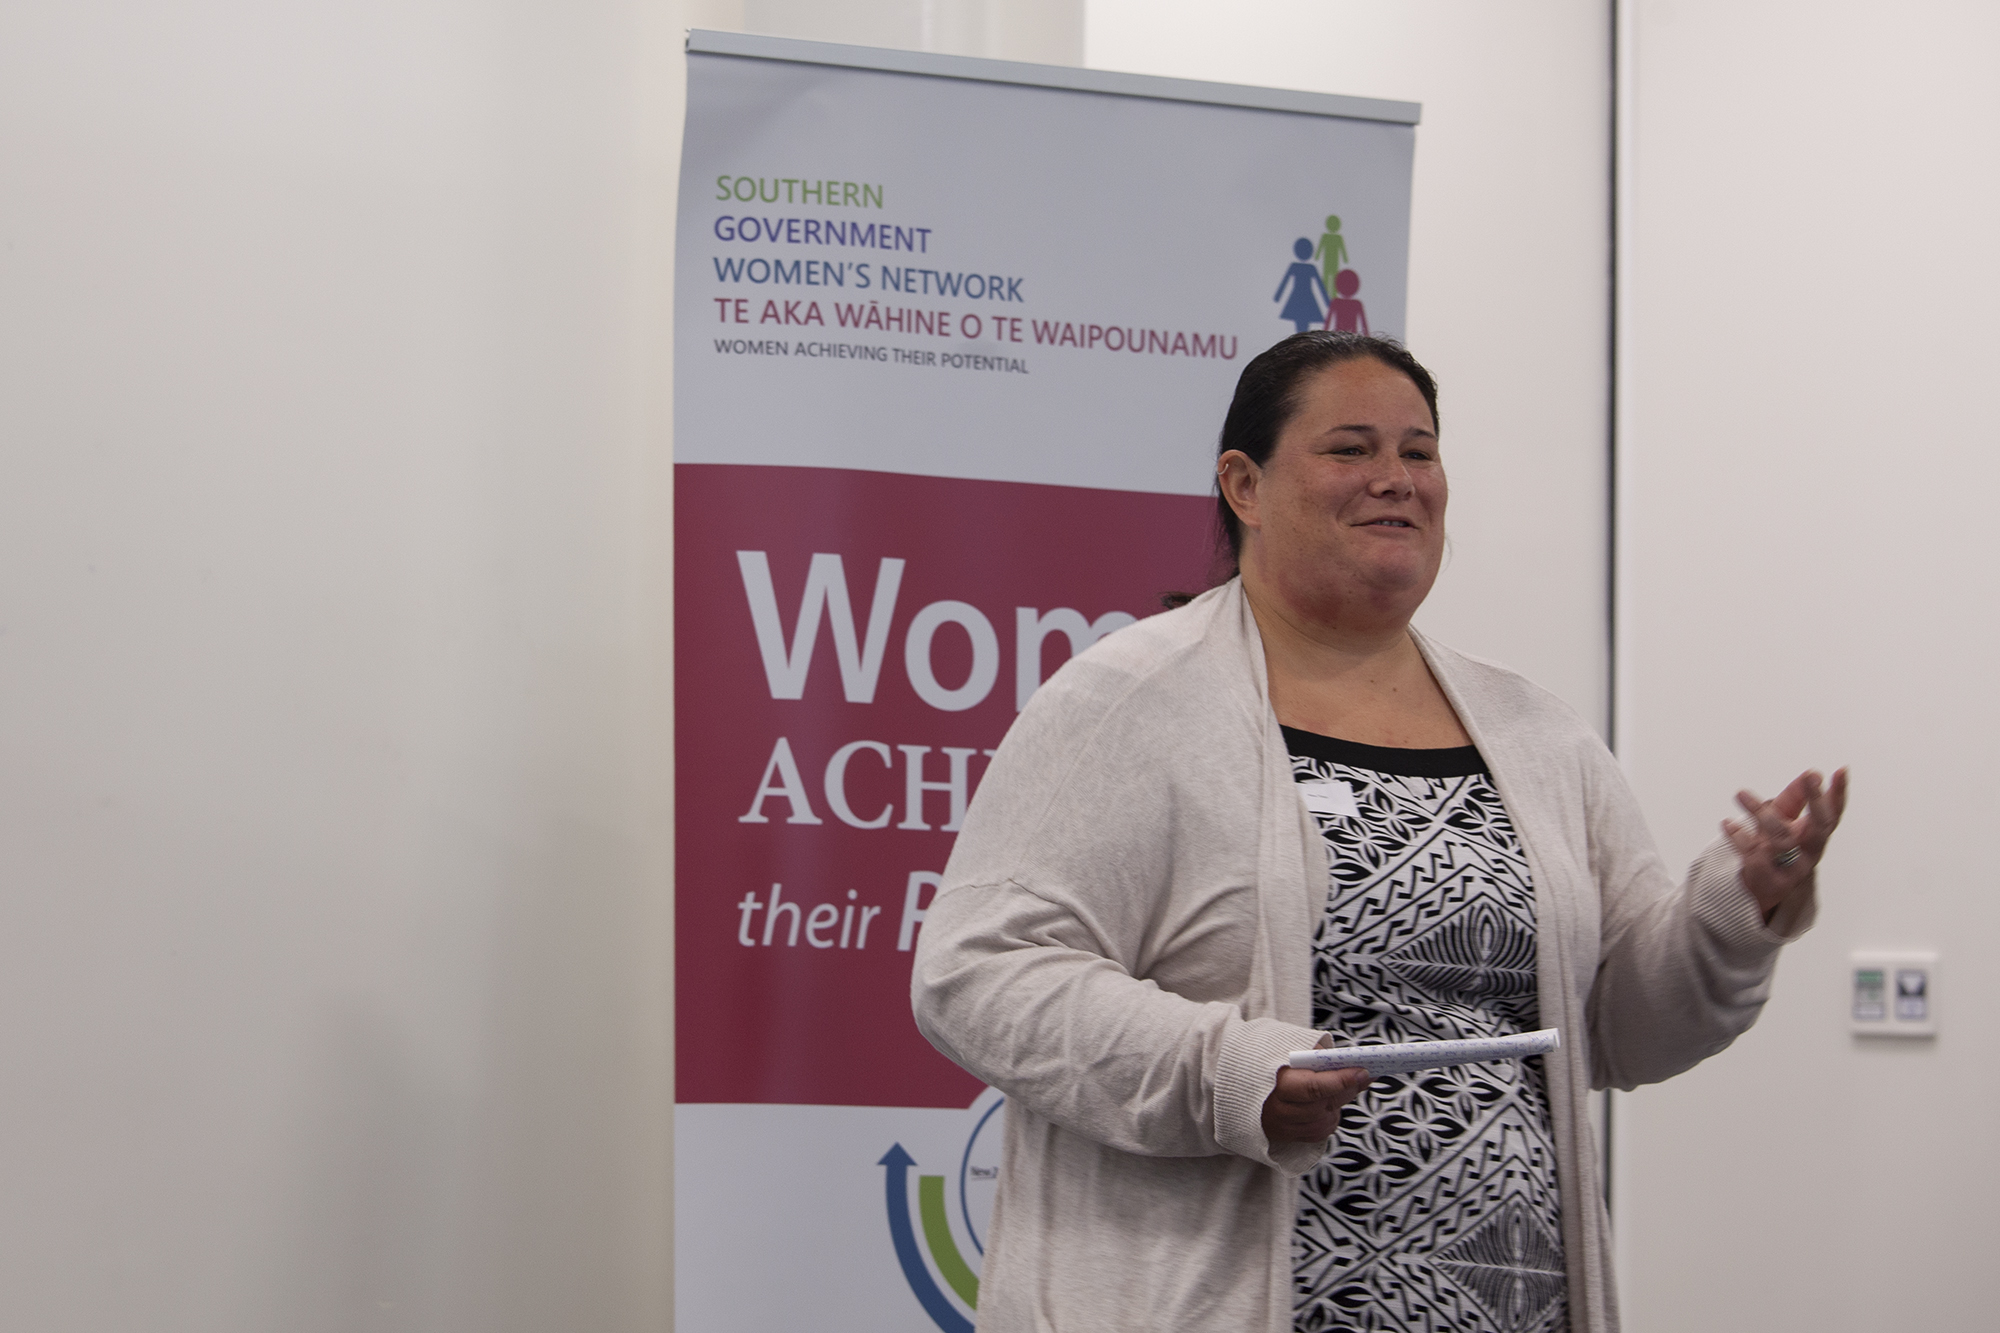 Speaker Alex Tino tells breakfast attendees about her experiences as a Pasifika woman